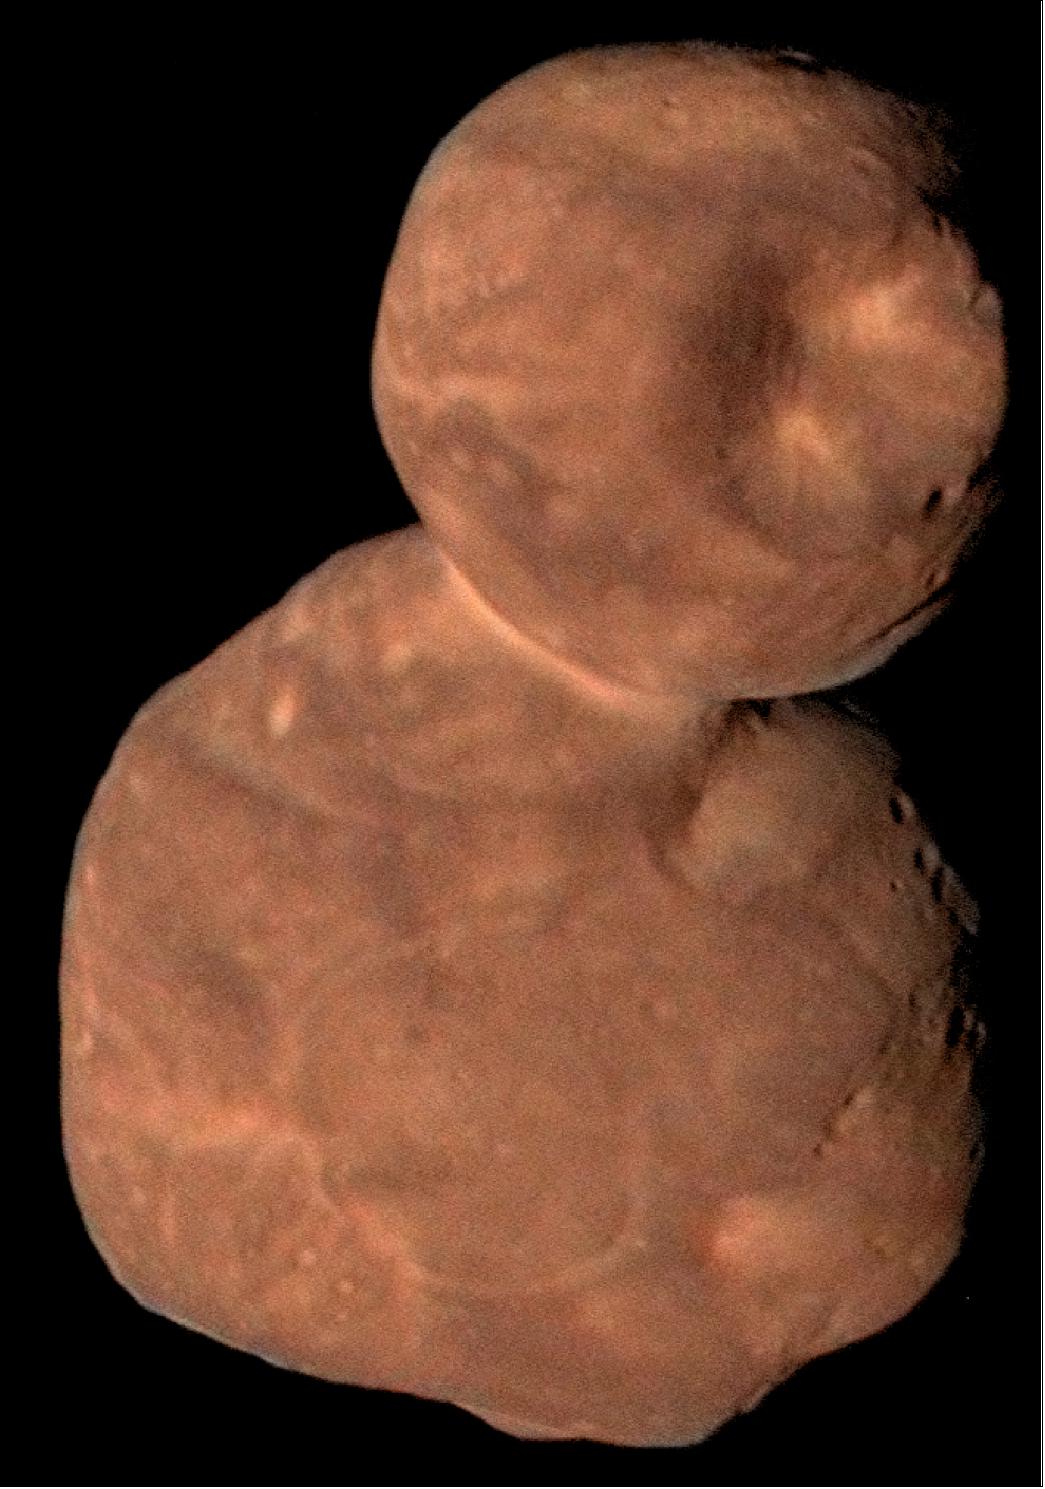 Figure 35: This composite image of the primordial contact binary Kuiper Belt Object 2014 MU69 (nicknamed Ultima Thule) – featured on the cover of the May 17 issue of the journal Science – was compiled from data obtained by NASA's New Horizons spacecraft as it flew by the object on Jan. 1, 2019. The image combines enhanced color data (close to what the human eye would see) with detailed high-resolution panchromatic pictures (image credit: NASA/Johns Hopkins University Applied Physics Laboratory/Southwest Research Institute/Roman Tkachenko)